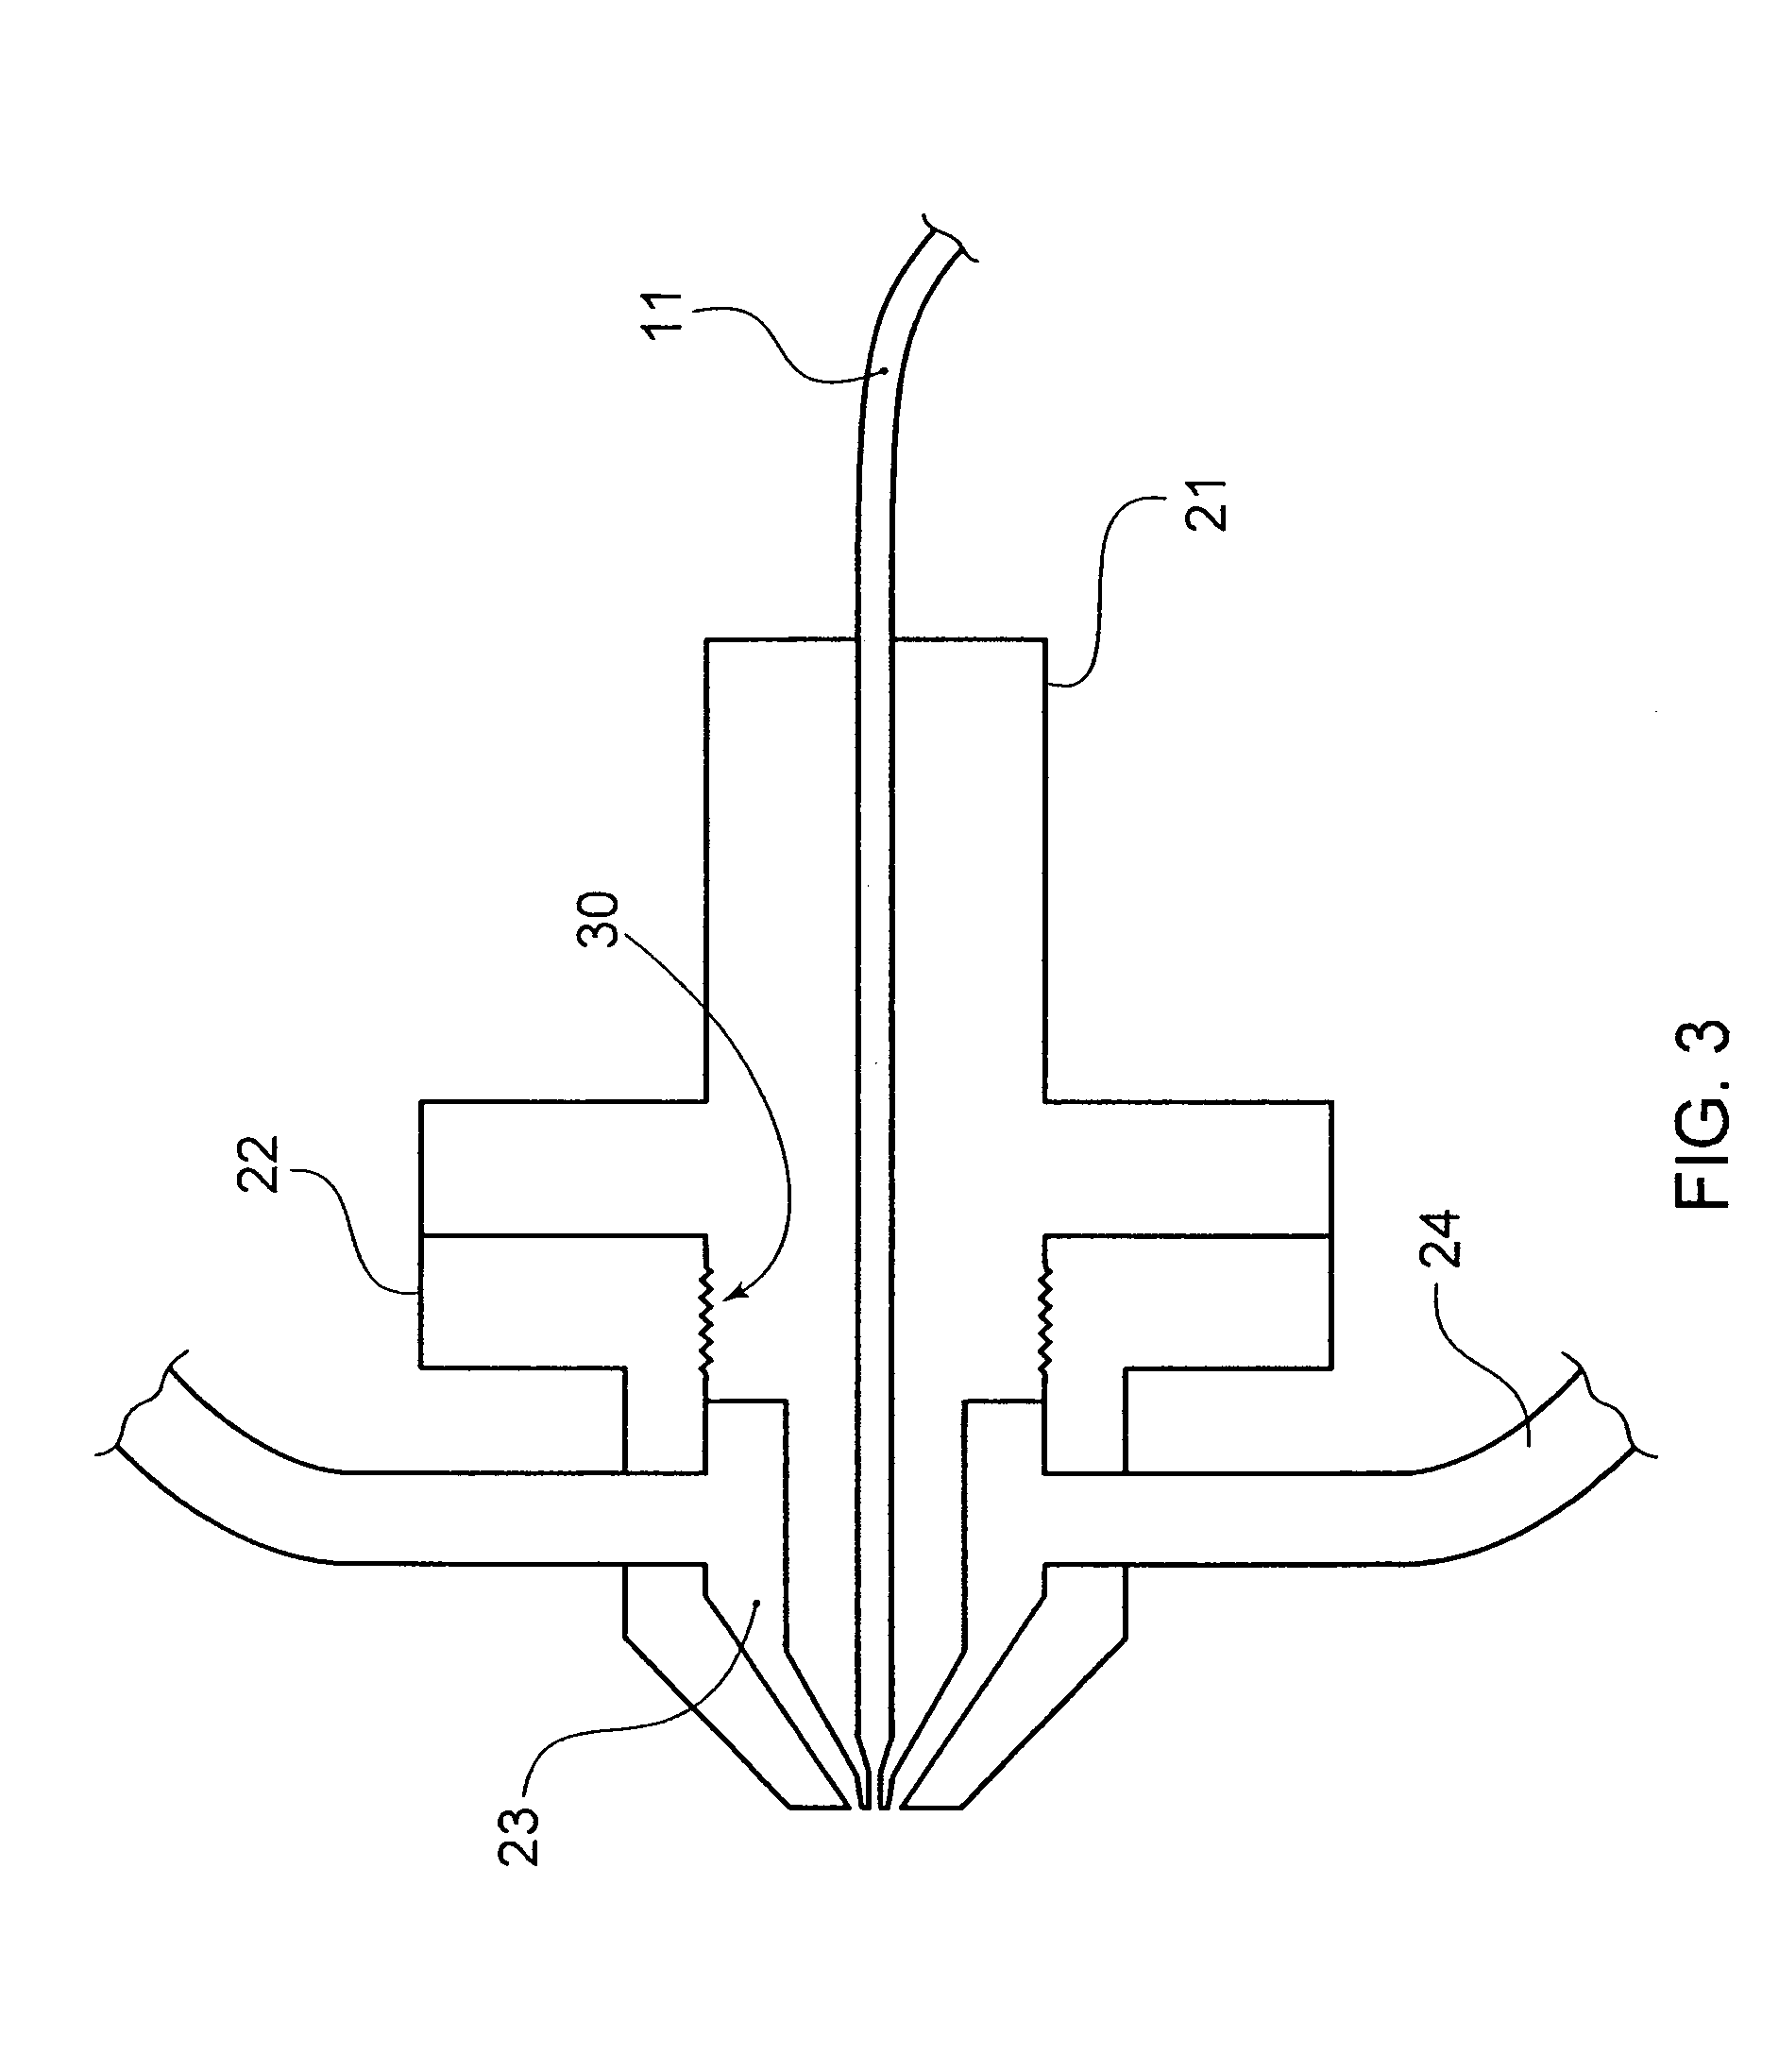 Method for fine bore orifice spray coating of medical devices and pre-filming atomization